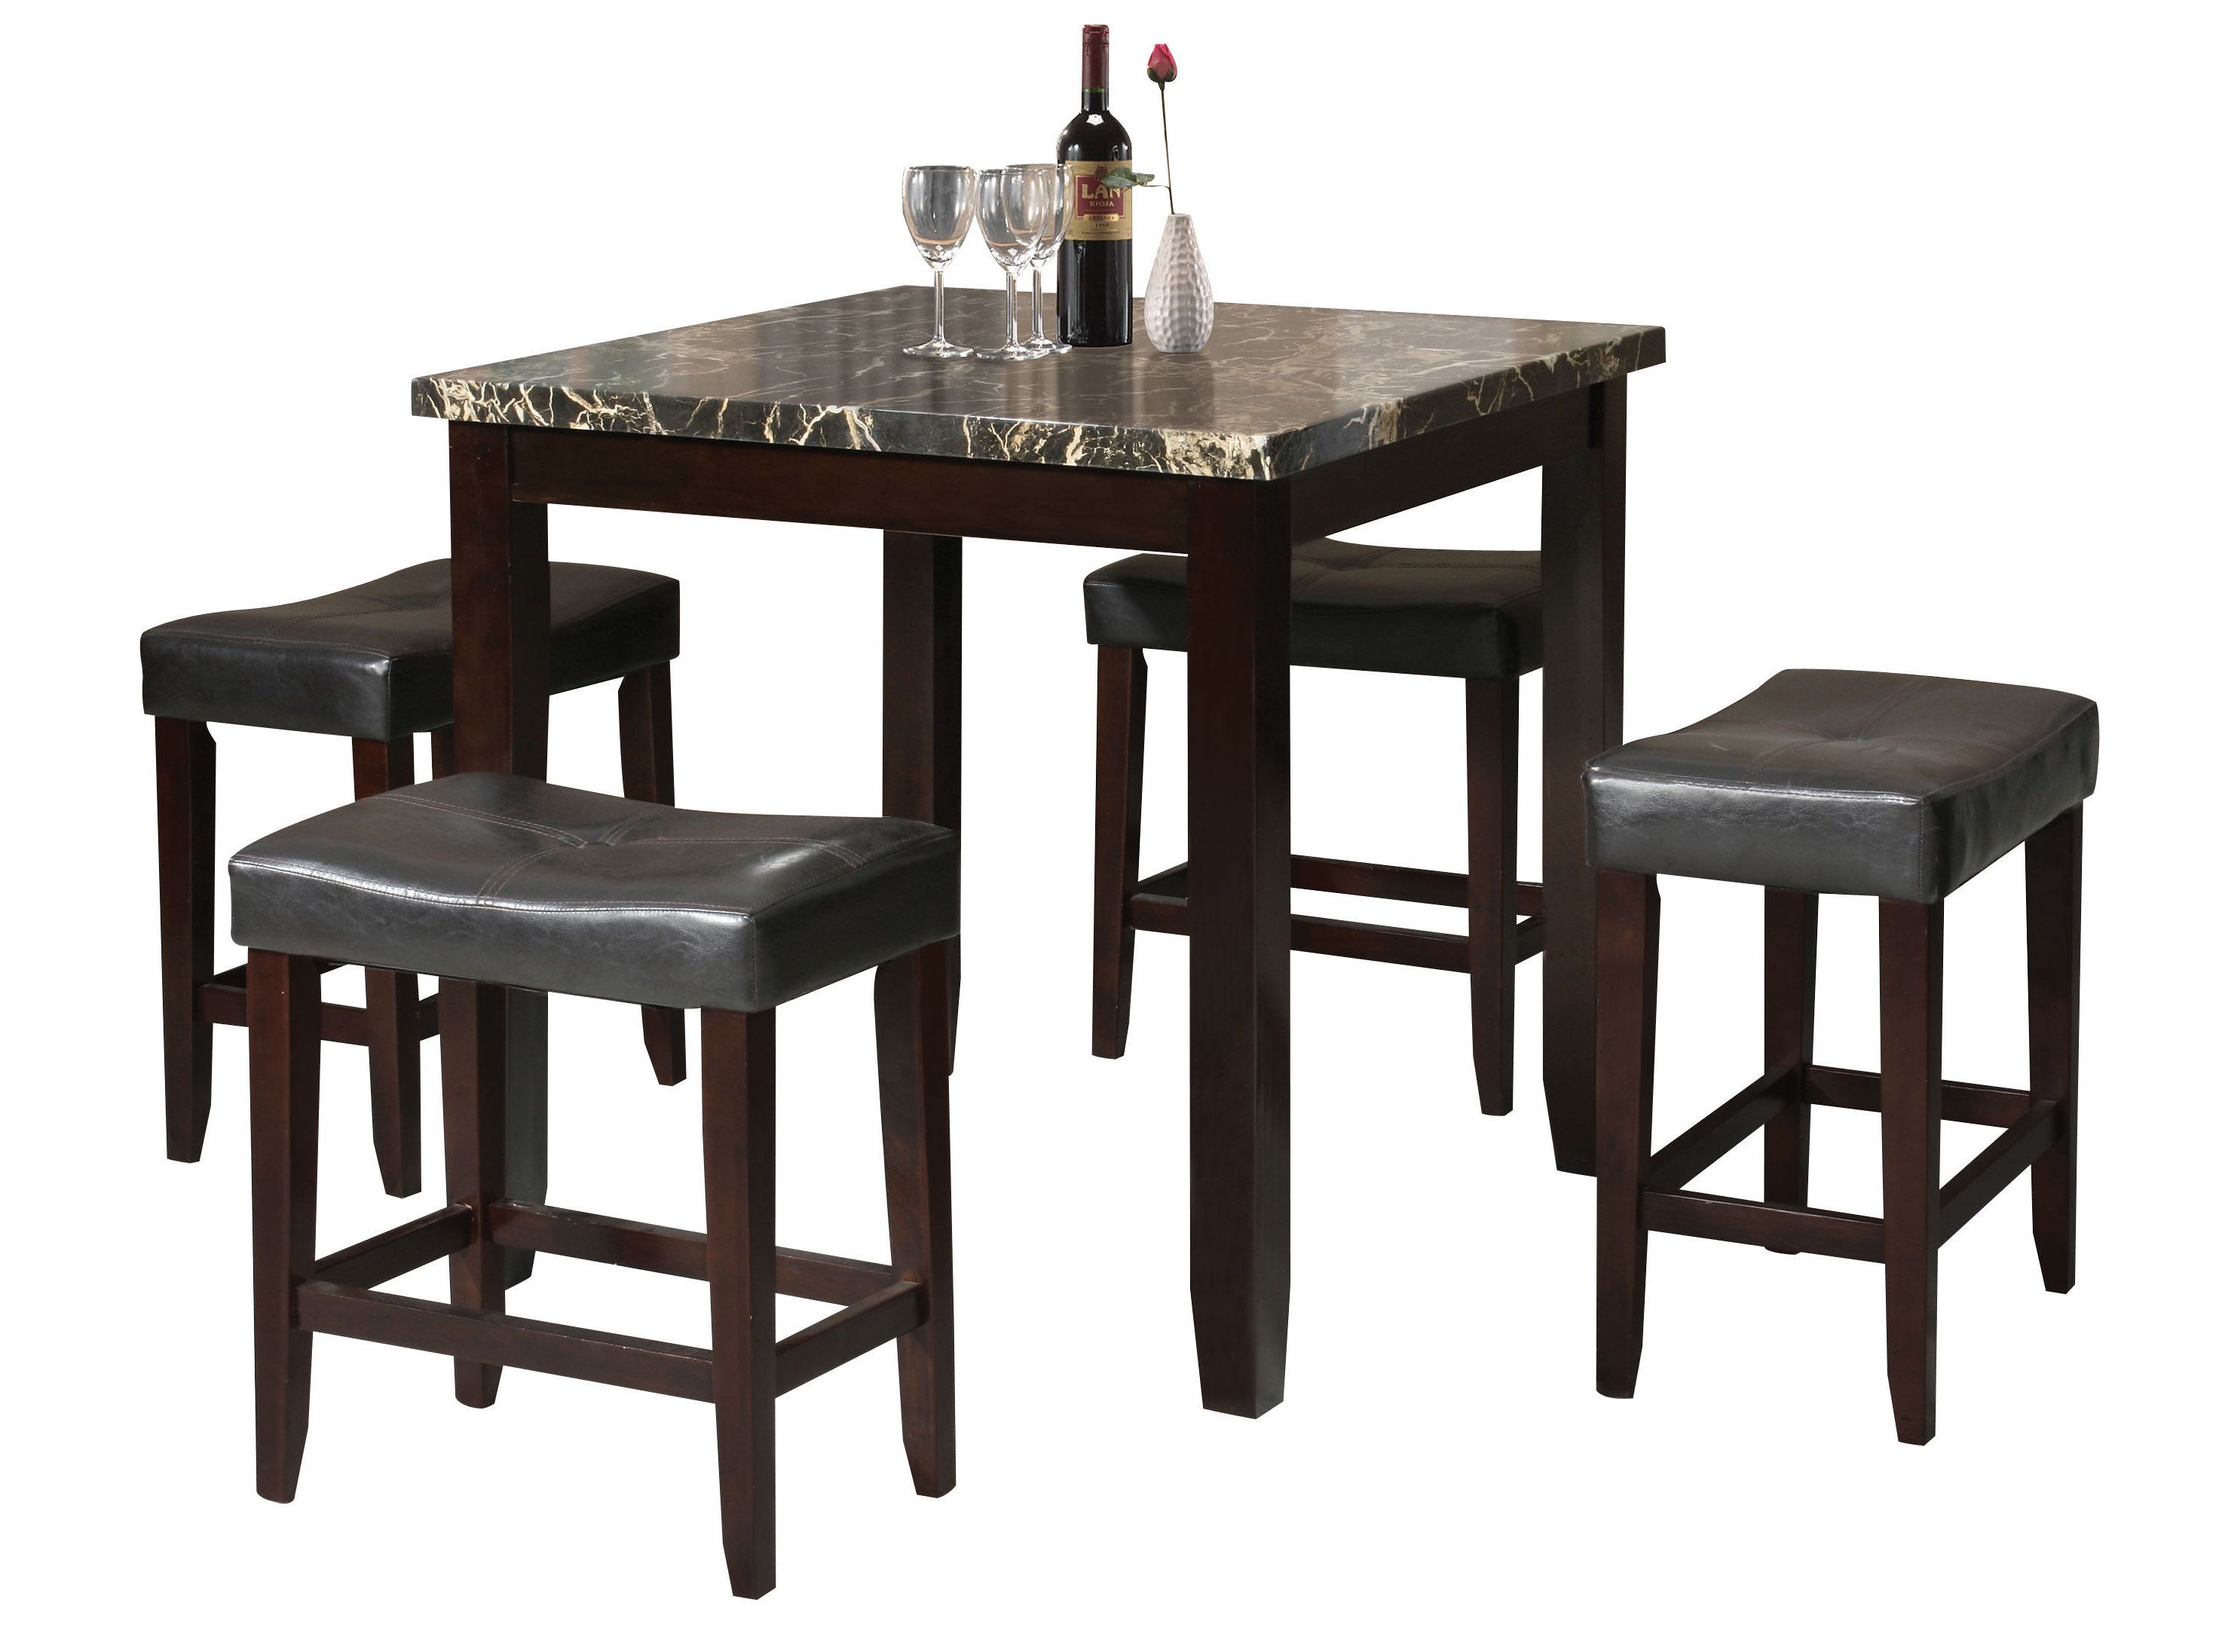 Dehaven 5 Piece Counter Height Dining Set Within 2017 Ryker 3 Piece Dining Sets (View 14 of 20)